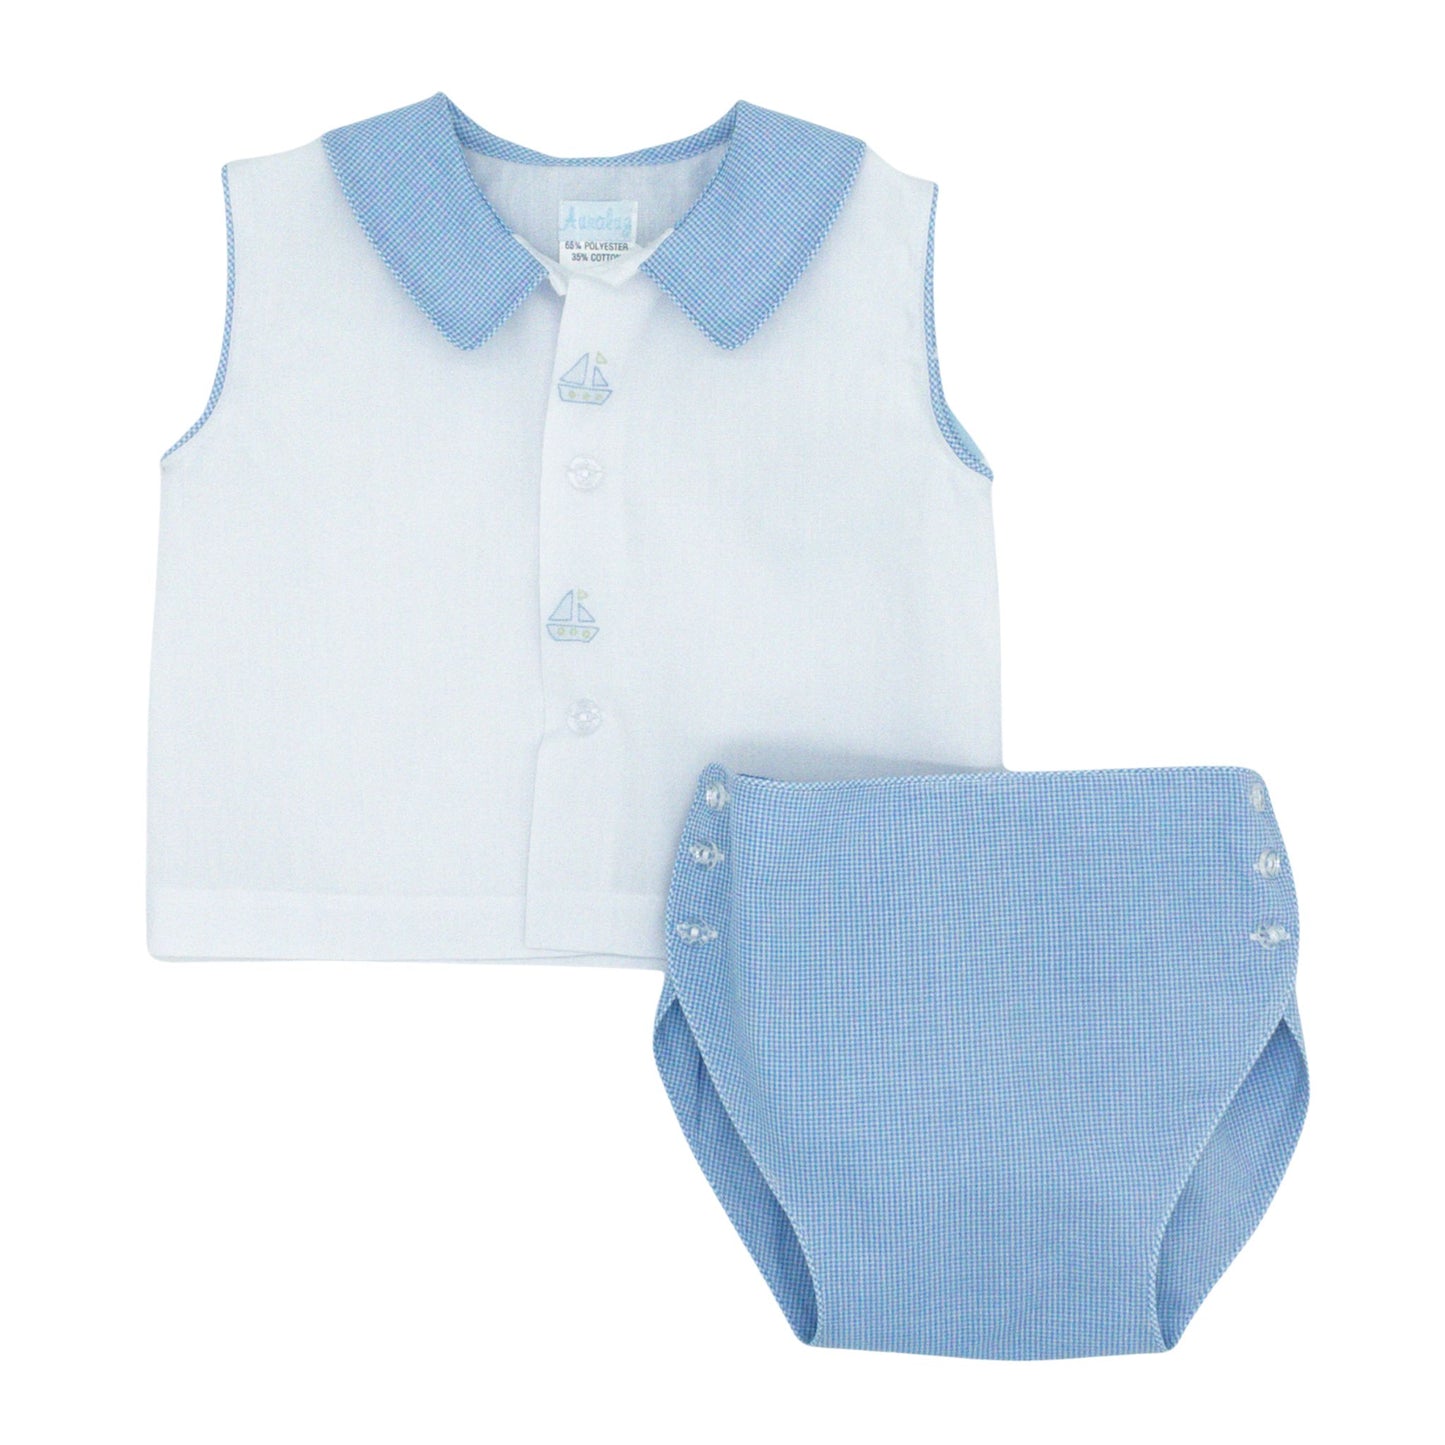 Boys Diaper Set with Sailboat Hand-embroidery